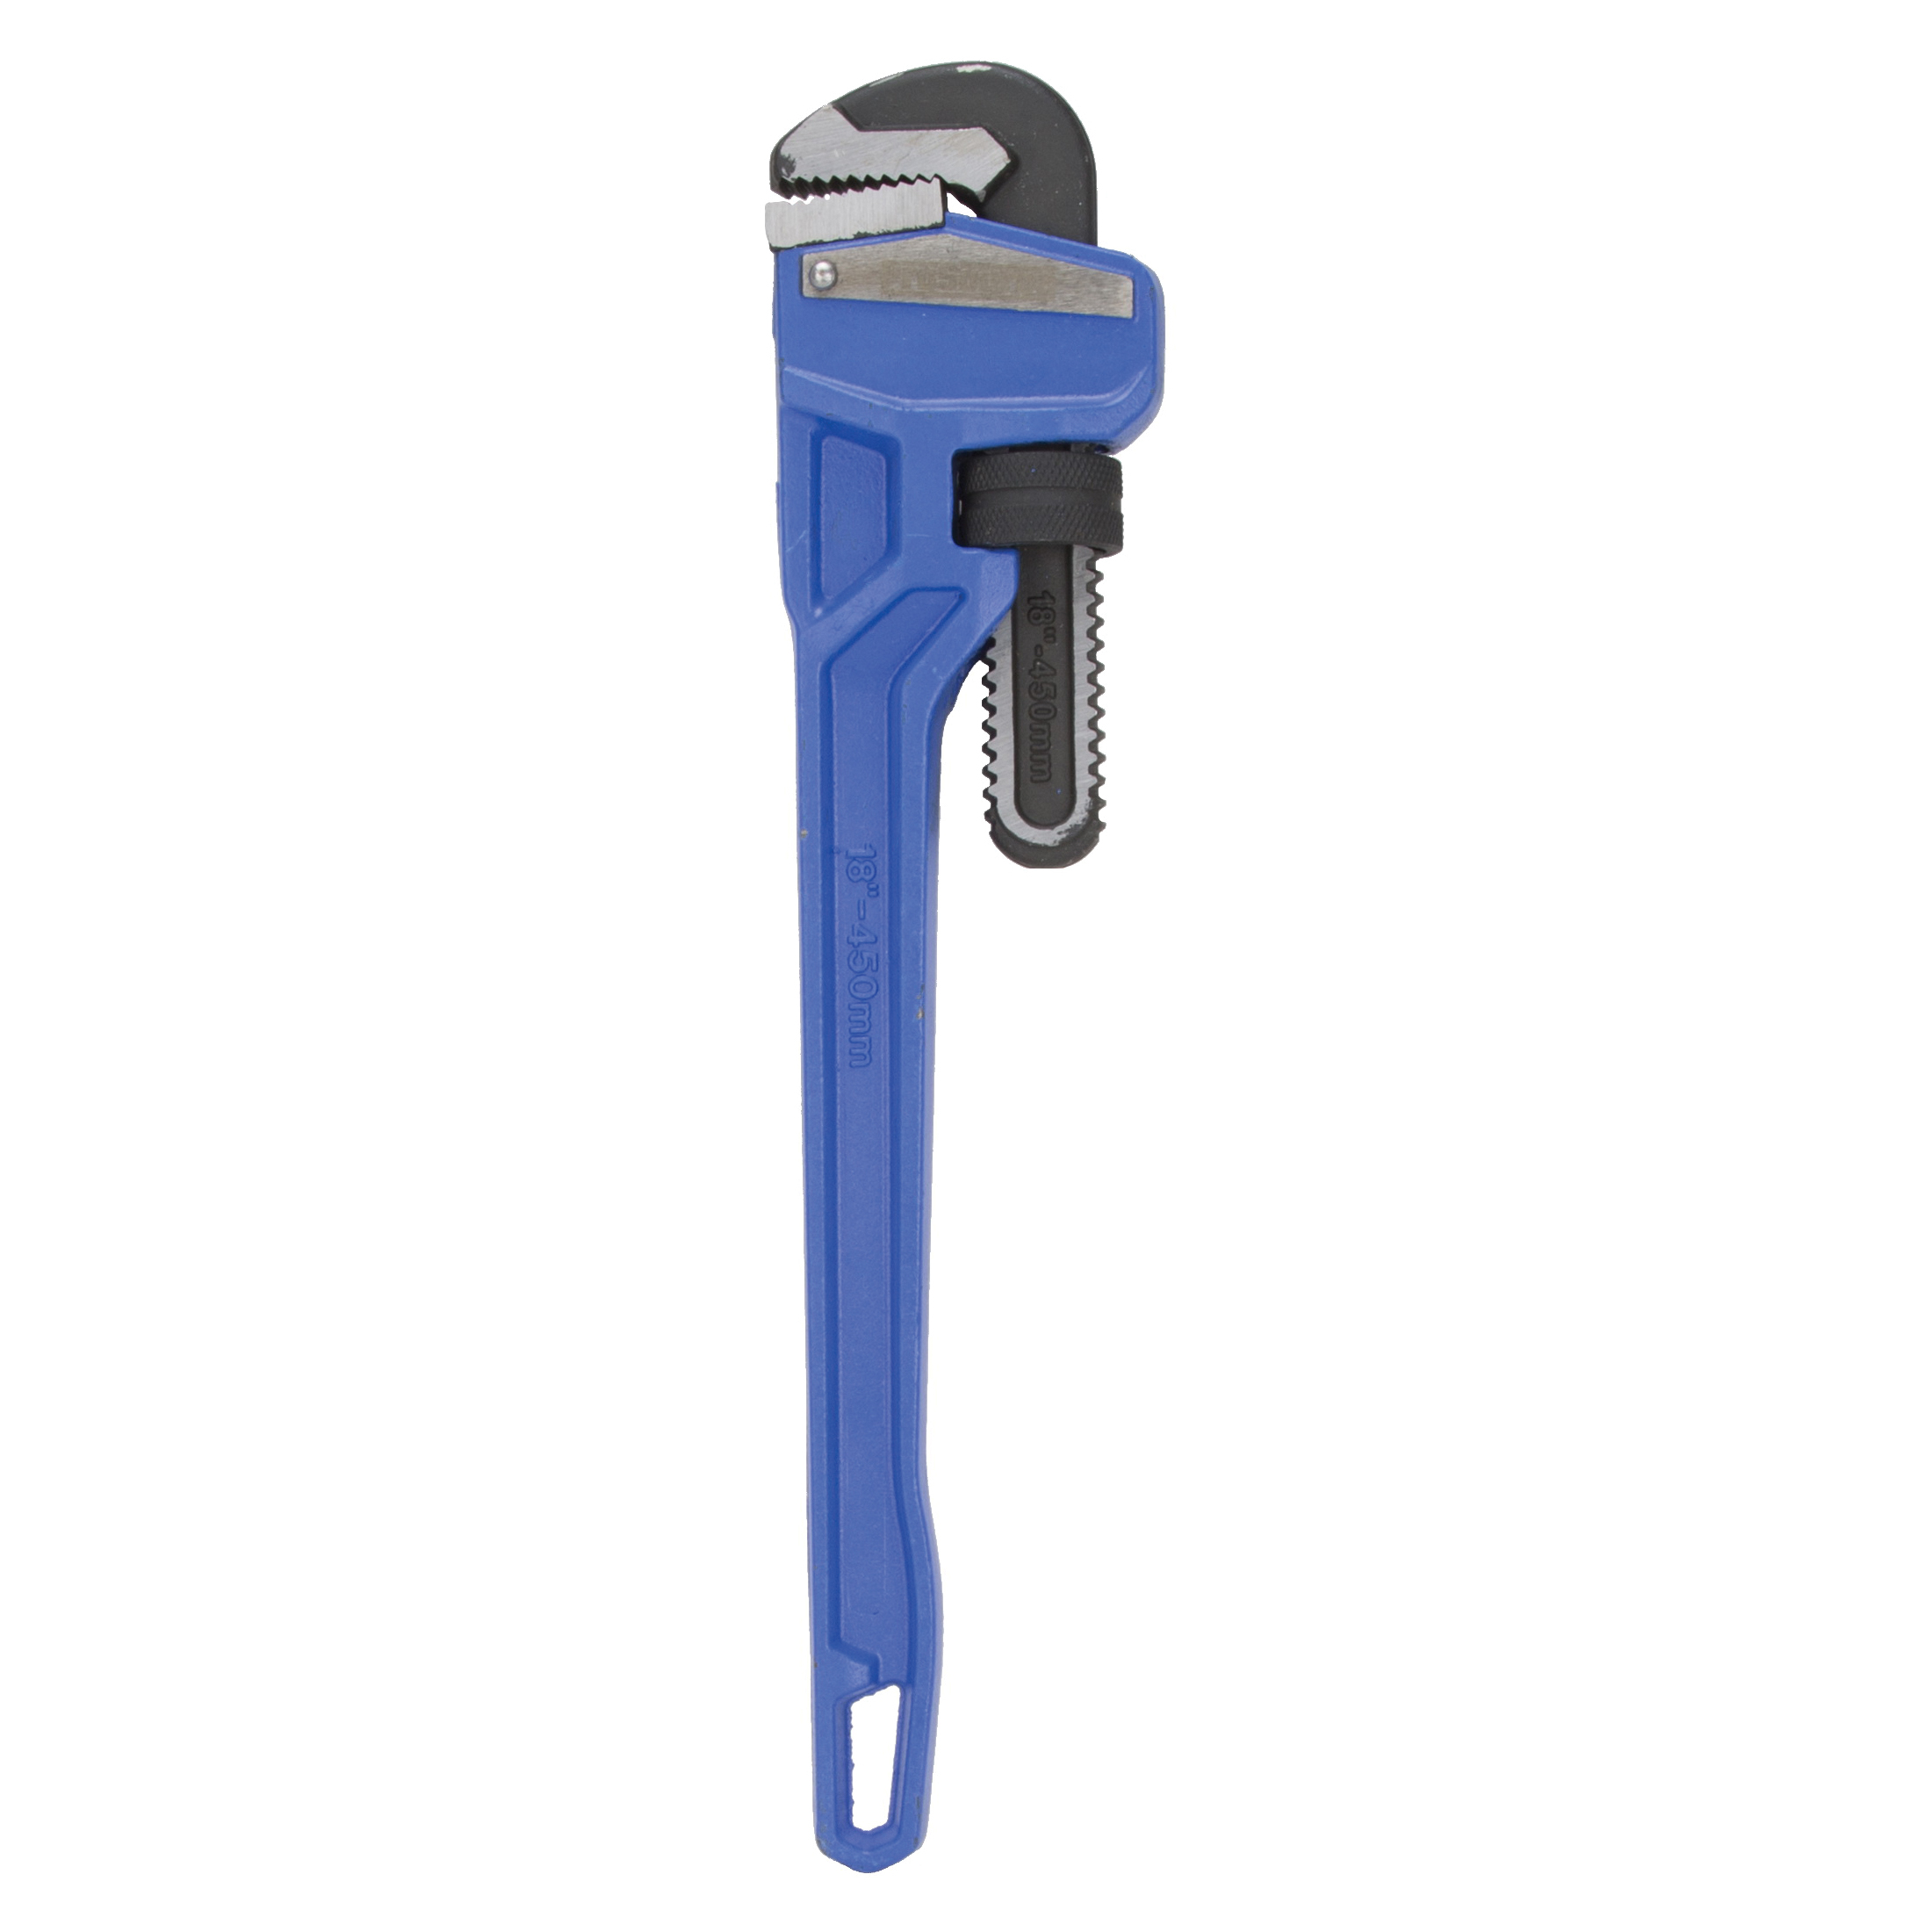 JL40118 Pipe Wrench, 50 mm Jaw, 18 in L, Serrated Jaw, Die-Cast Carbon Steel, Powder-Coated, Heavy-Duty Handle